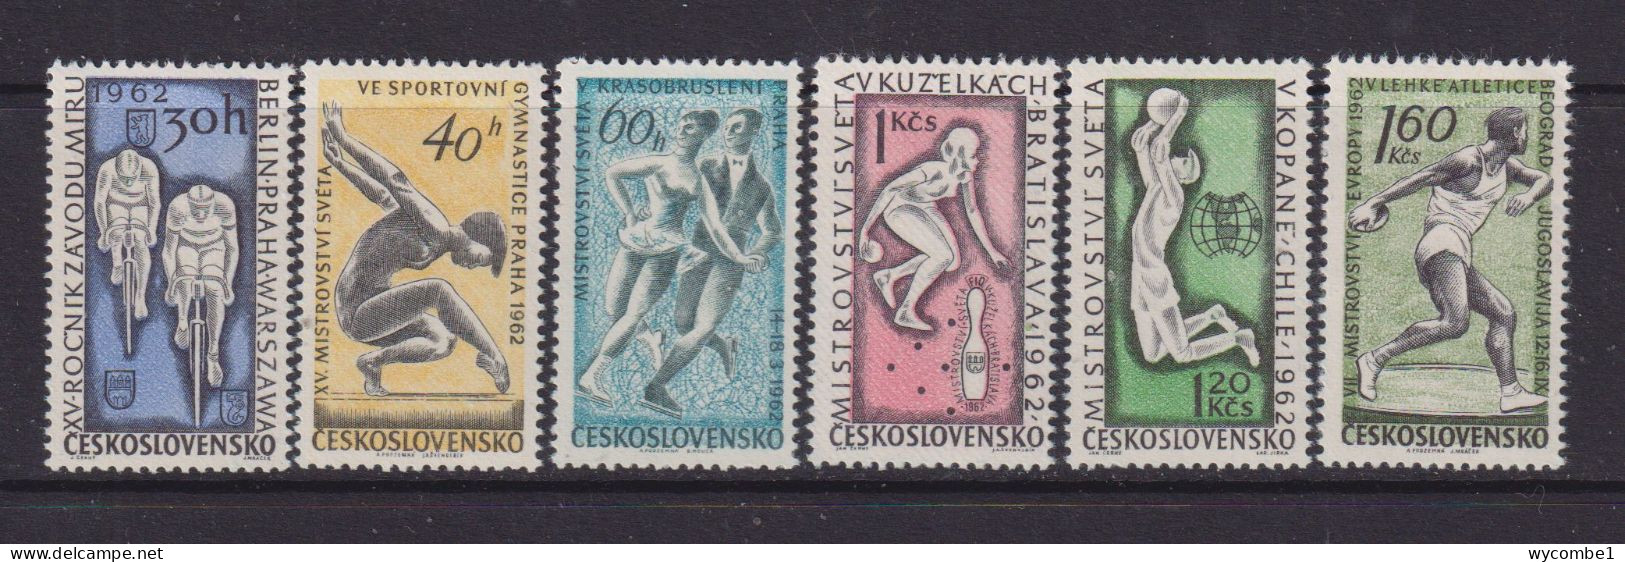 CZECHOSLOVAKIA  - 1962 Sports Events Set Never Hinged Mint - Unused Stamps